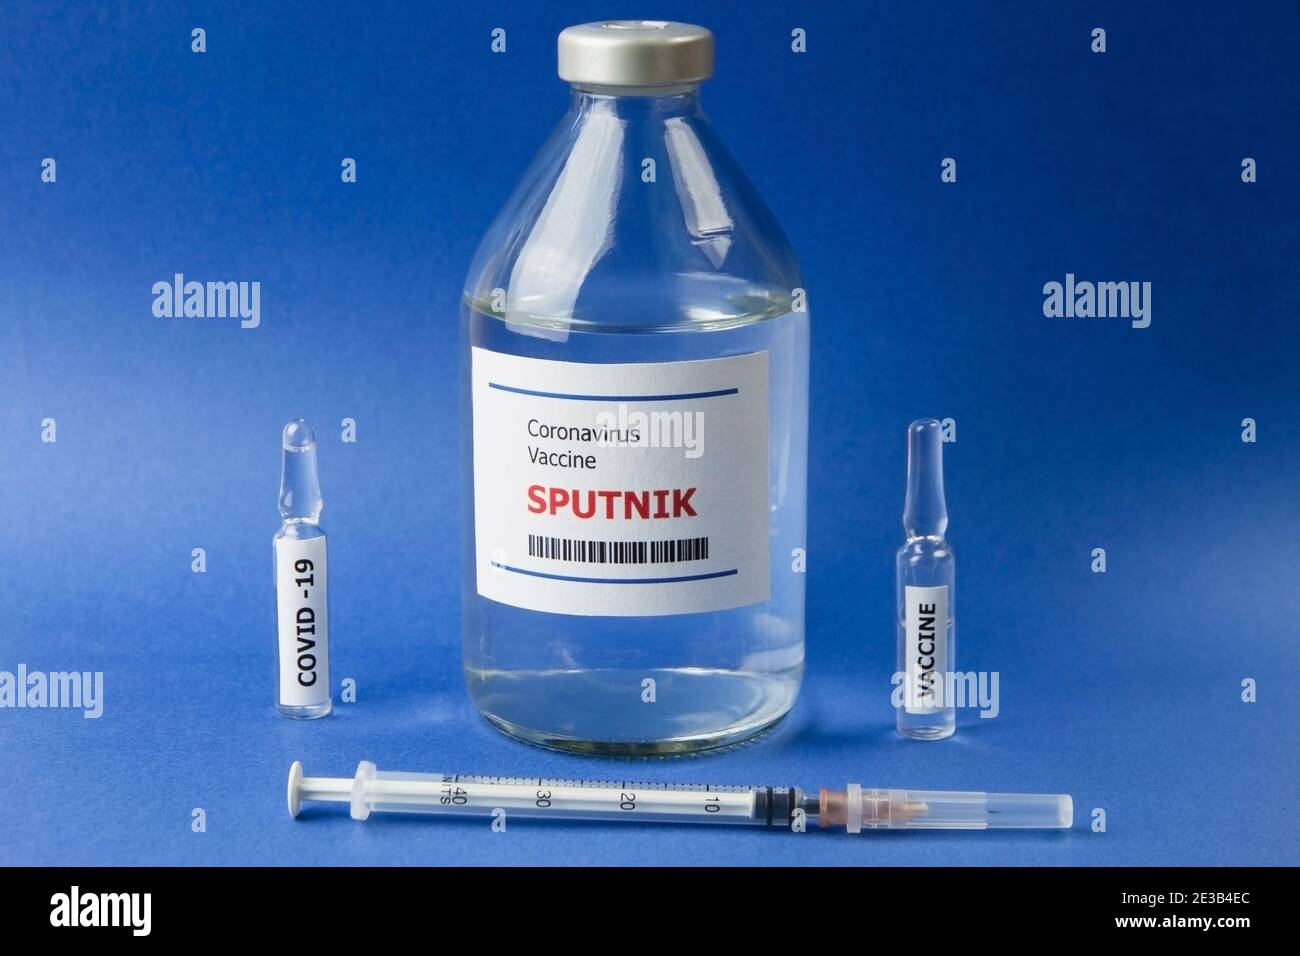 Krasnodar, Russia - January 12, 2021: Two ampoules, a syringe and a bottle  with the Sputnik vaccine from Covid-19 on a blue background Stock Photo -  Alamy